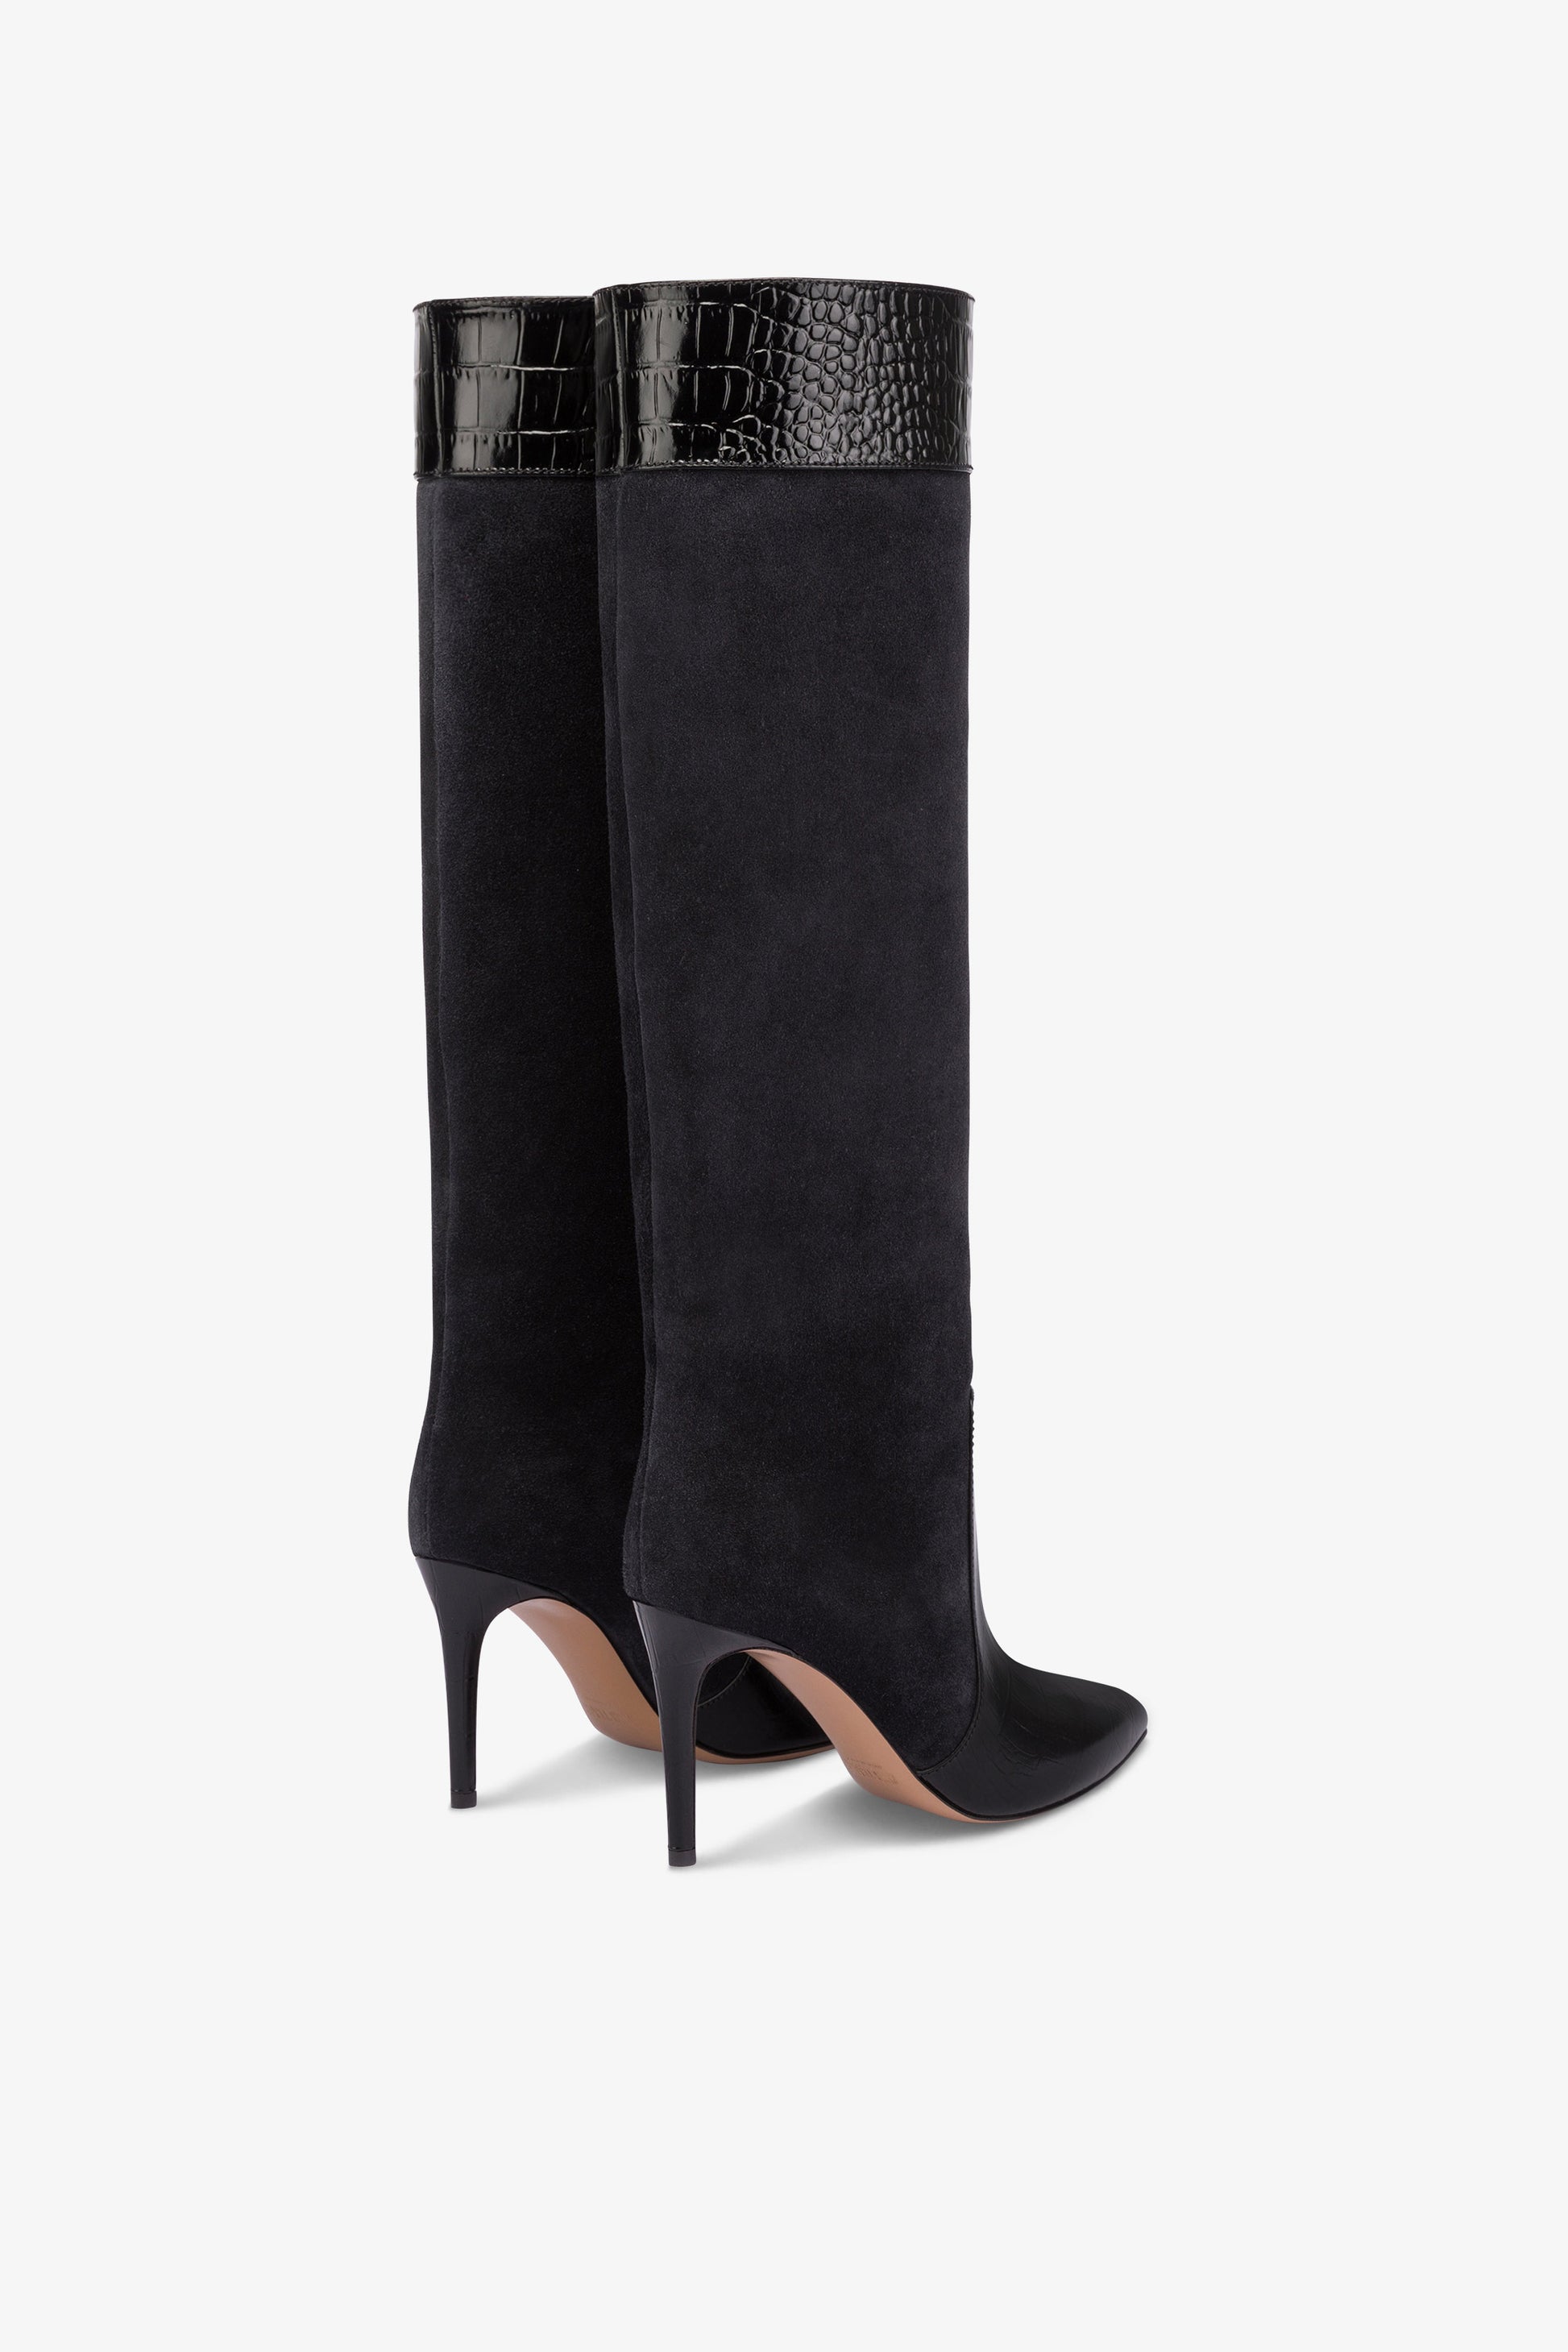 Long, pointed boots in black and off-black croco-embossed and suede